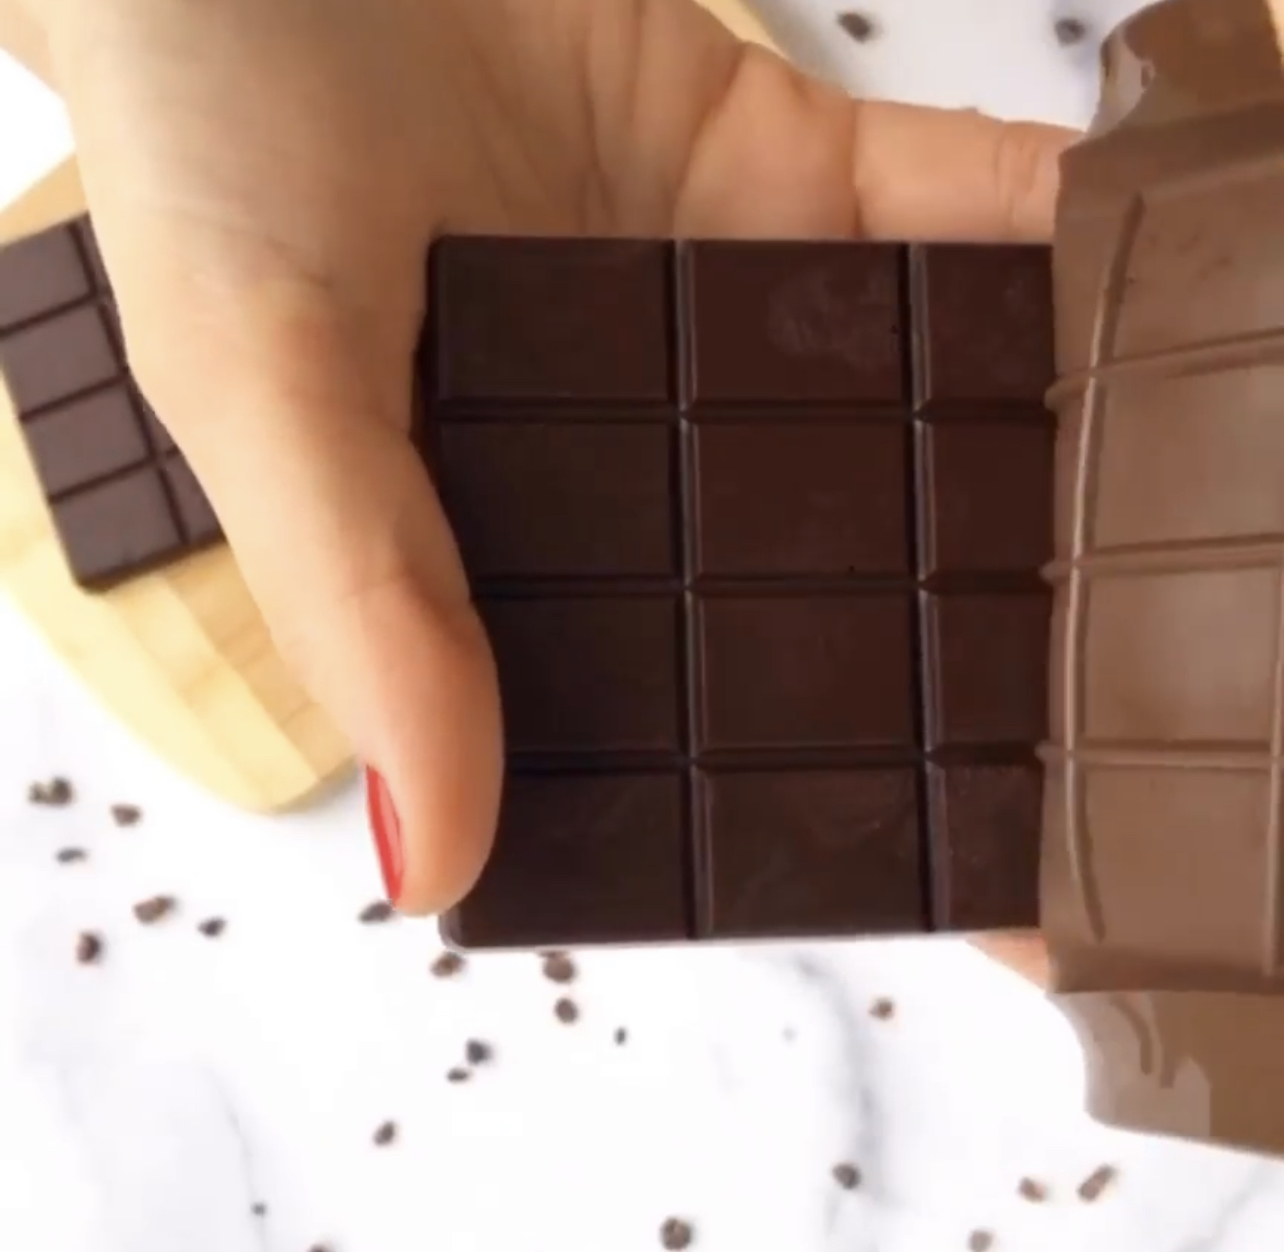 Removing a vegan chocolate bar from the chocolate mold.